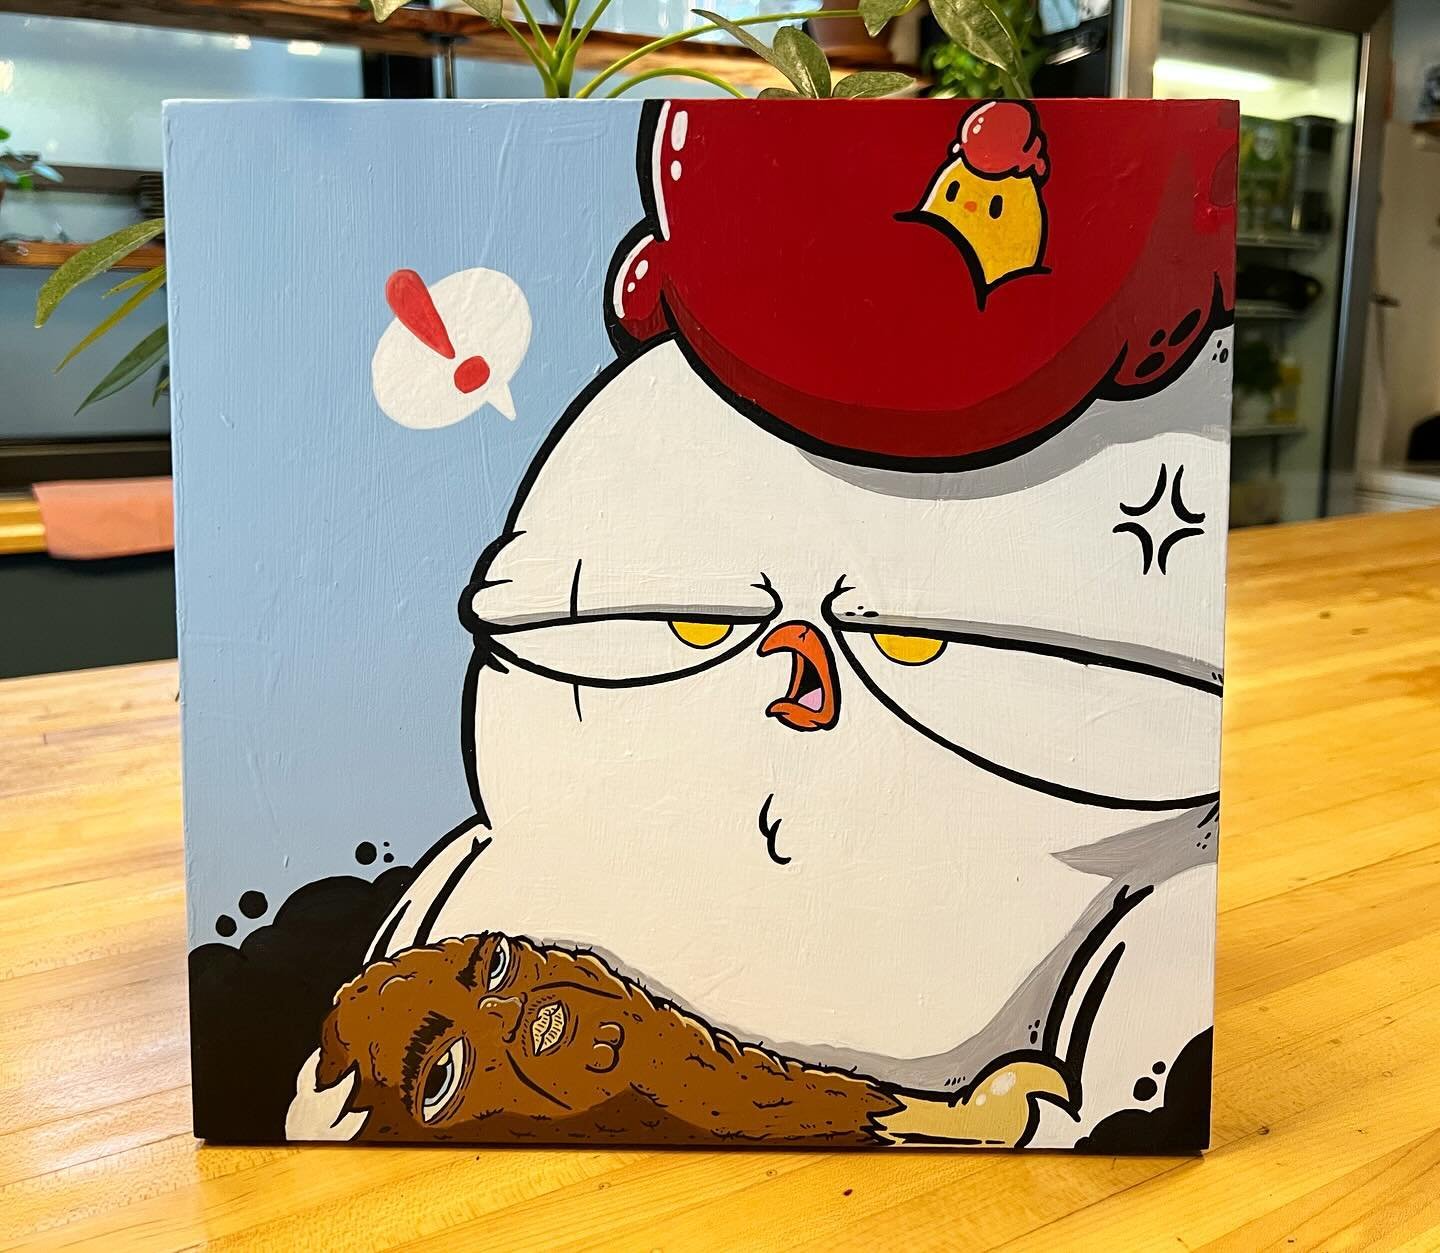 &ldquo;Finger lickin&rsquo; good&rdquo; my 12 x 12 piece for the welcome committee  show Out in Nashville. Hosted by @odd.grass at @visualminds.co 
.
Be sure to swing by the show on May 18th to check out over 70+ artists 
.
#birdmilk #chicago #art #n